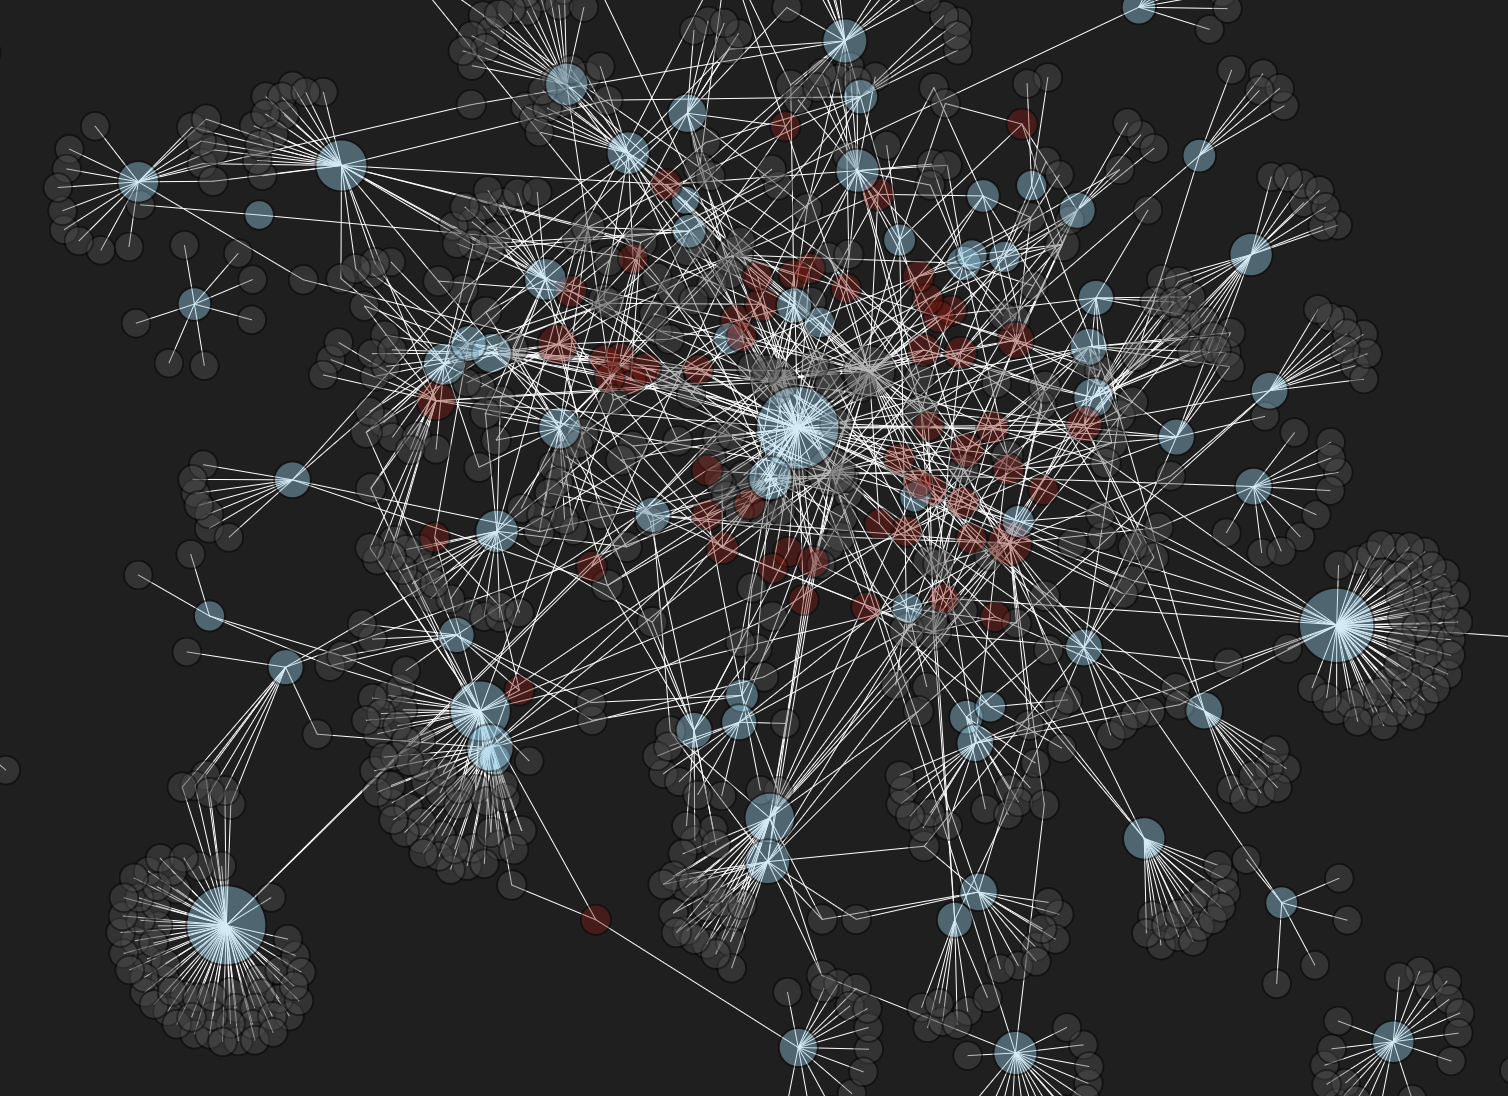 A large network diagram over a dark background